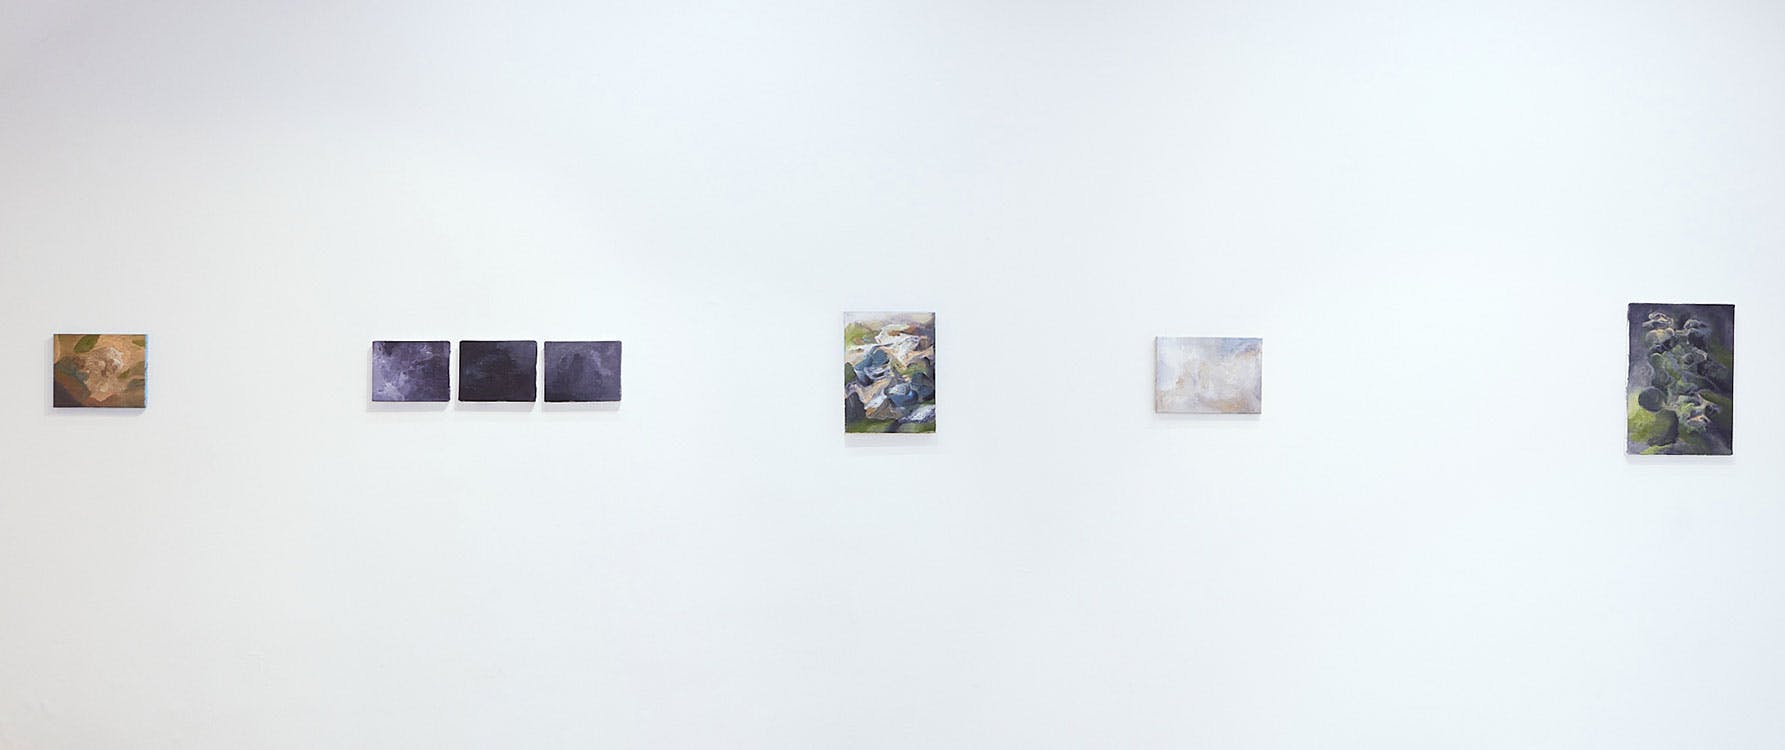 Öktem Aykut is founded by Doga Öktem and Tankut Aykut in November, 2014 in Istanbul. The gallery has organized over 100 exhibitions in two different gallery locations and in extra spaces so far, and took part in many international art fairs. Öktem Aykut has mostly exhibited works by Istanbul-based emerging and mid-career artists. Doga and Tankut have aimed to work with artists of diverse backgrounds with alternating artistic references, yet the gallery mainly cared to highlight a common critical approach towards contemporary societal conditions. The prolific practice of exhibition making and the remaining inclusive approach towards the divergent Istanbul art communities made Öktem Aykut the leading young independent contemporary art gallery in Turkey. The gallery work is chiefly assumed by Doga and Tankut, with the help of their sole assistant Mehmet Akyildiz since from the beginning.